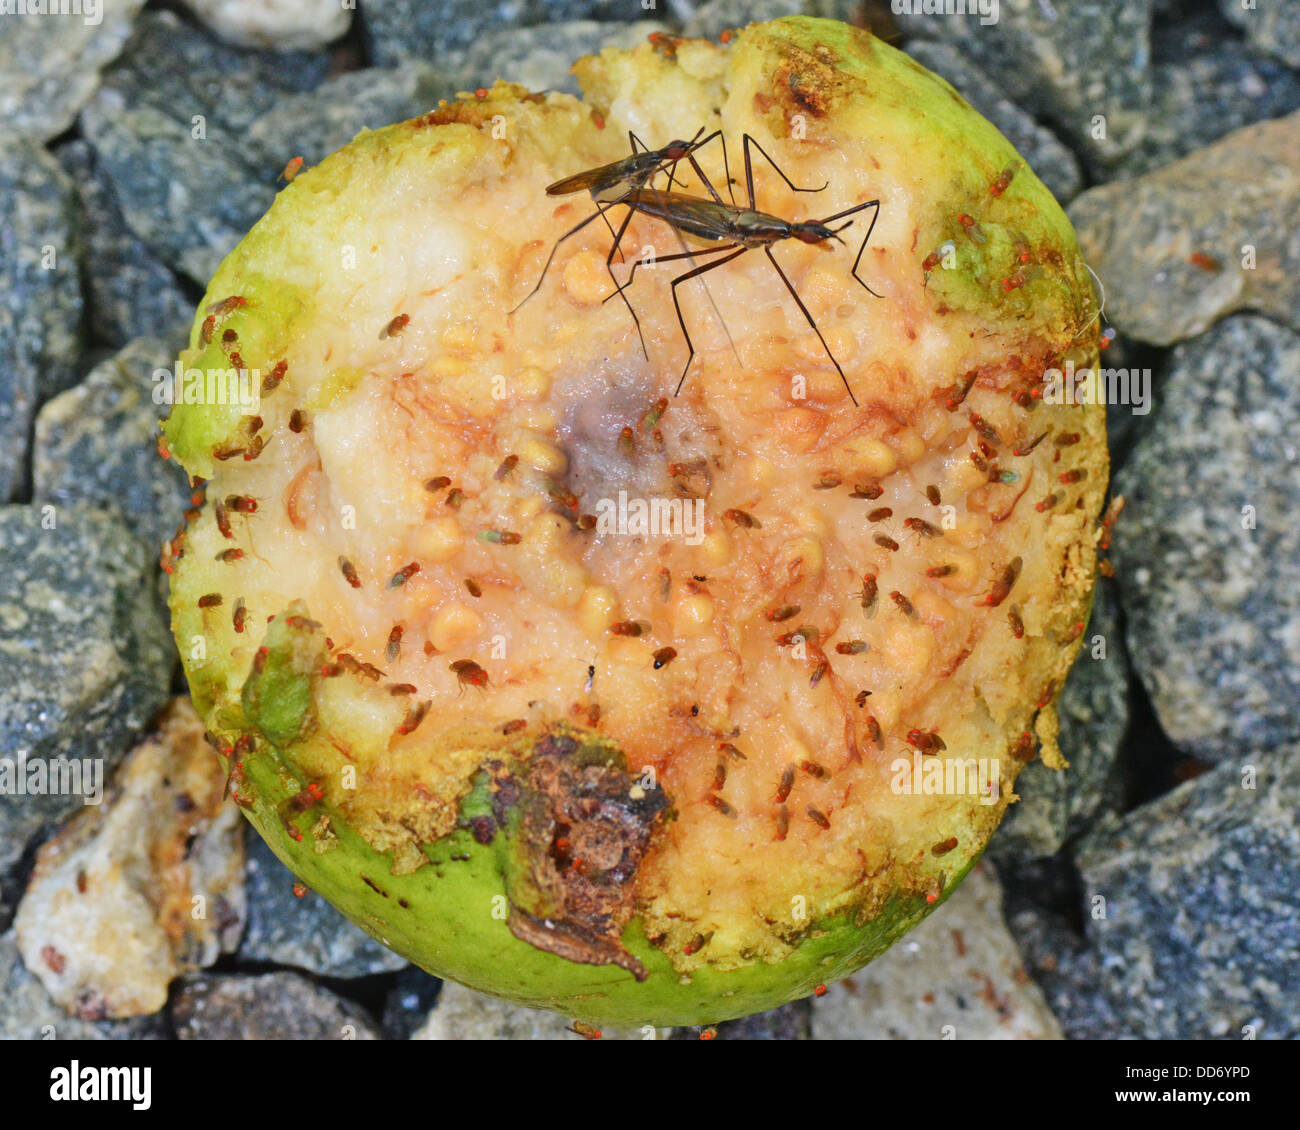 A fallen guava fruit covered with fruit flies Stock Photo